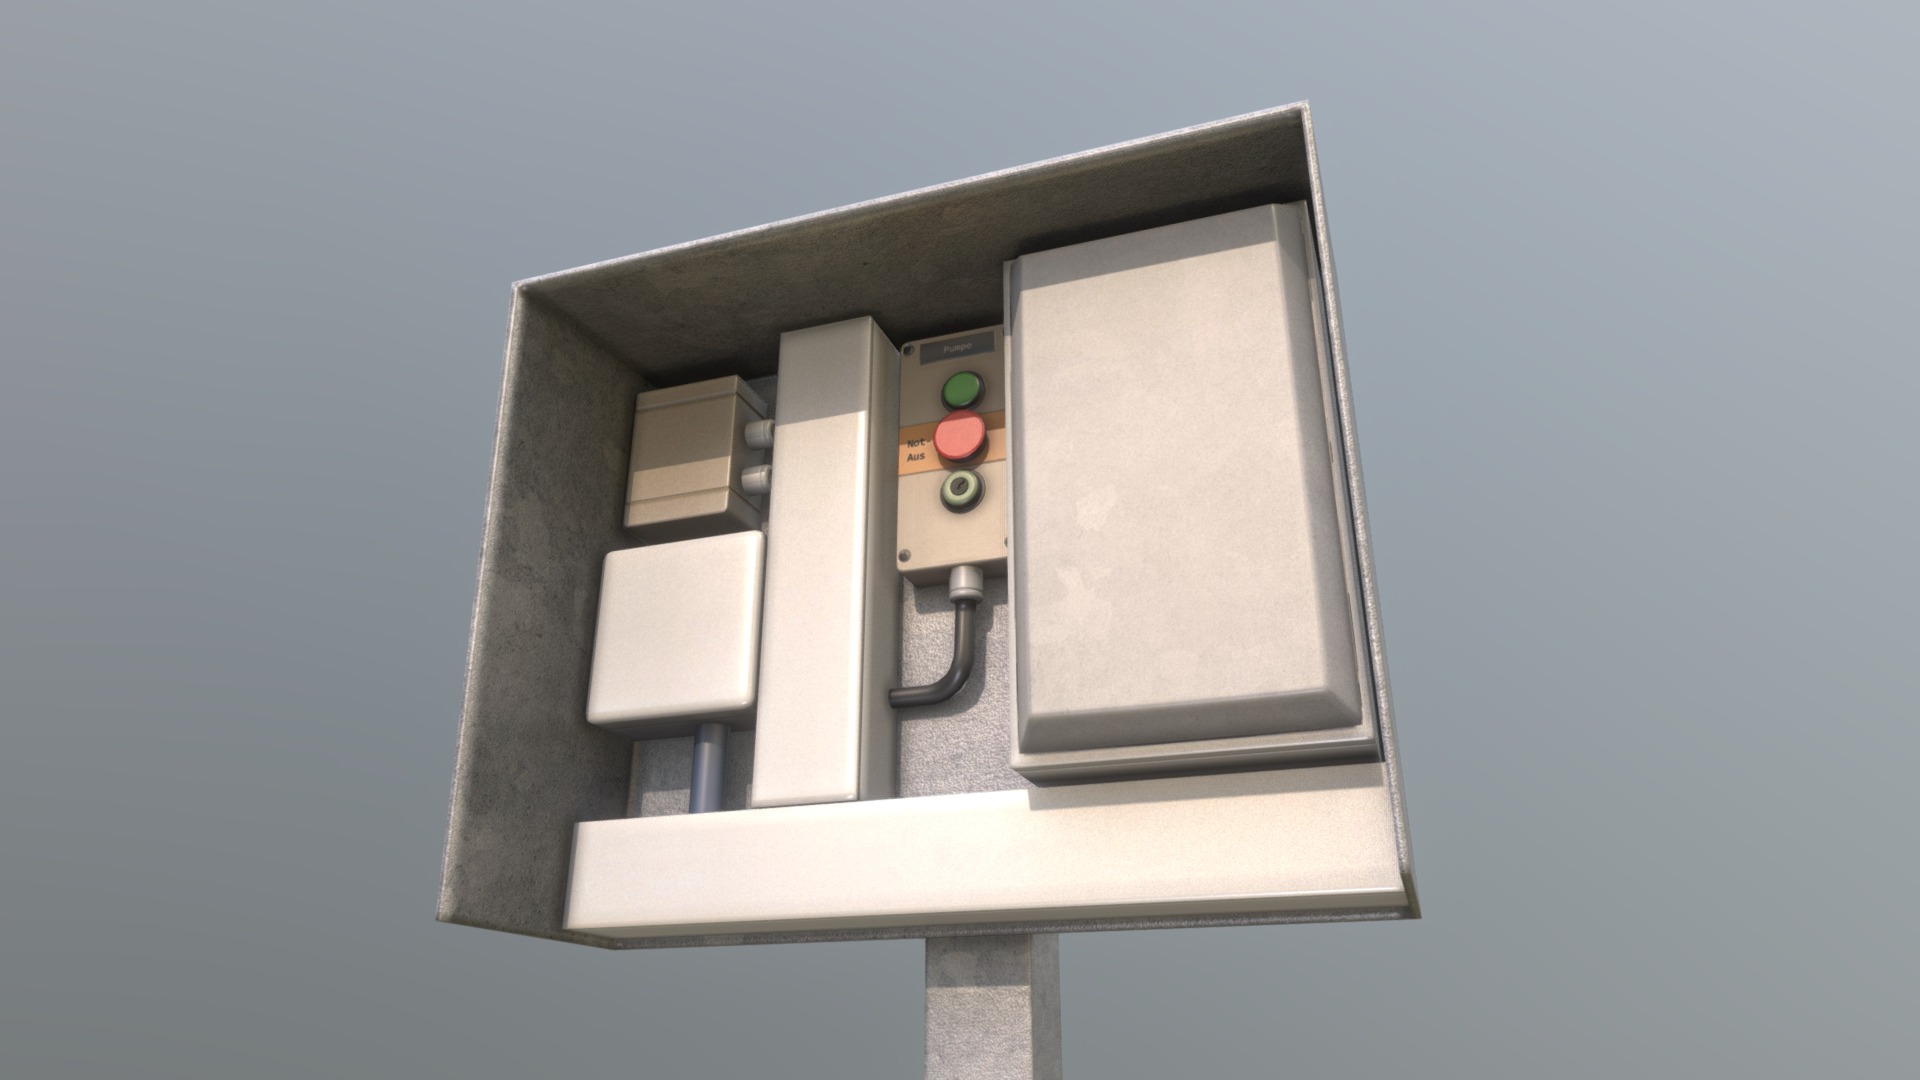 3D model Pump Panel 3 – Control Element 7 (Low-Poly) - This is a 3D model of the Pump Panel 3 - Control Element 7 (Low-Poly). The 3D model is about a white rectangular object with a screen.